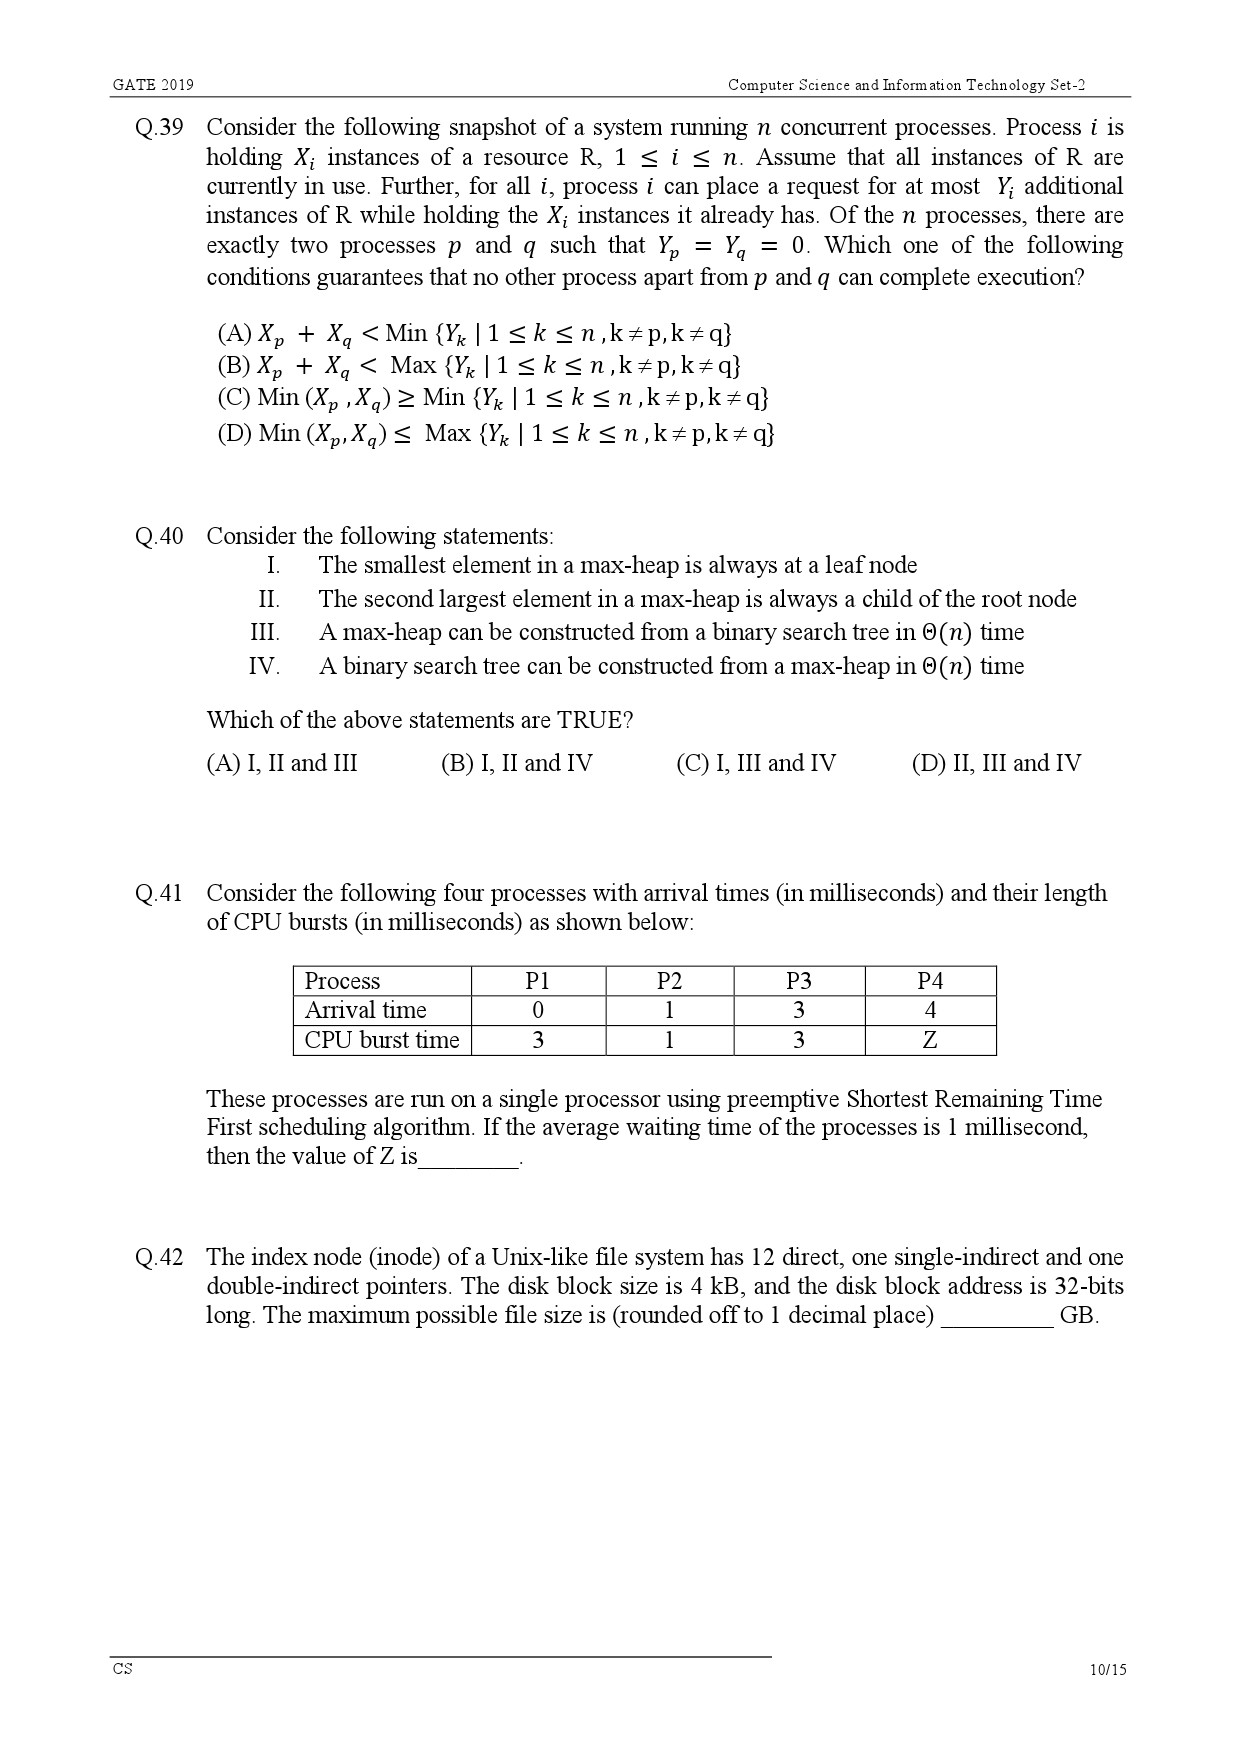 GATE Exam Question Paper 2019 Computer Science and Information Technology 13